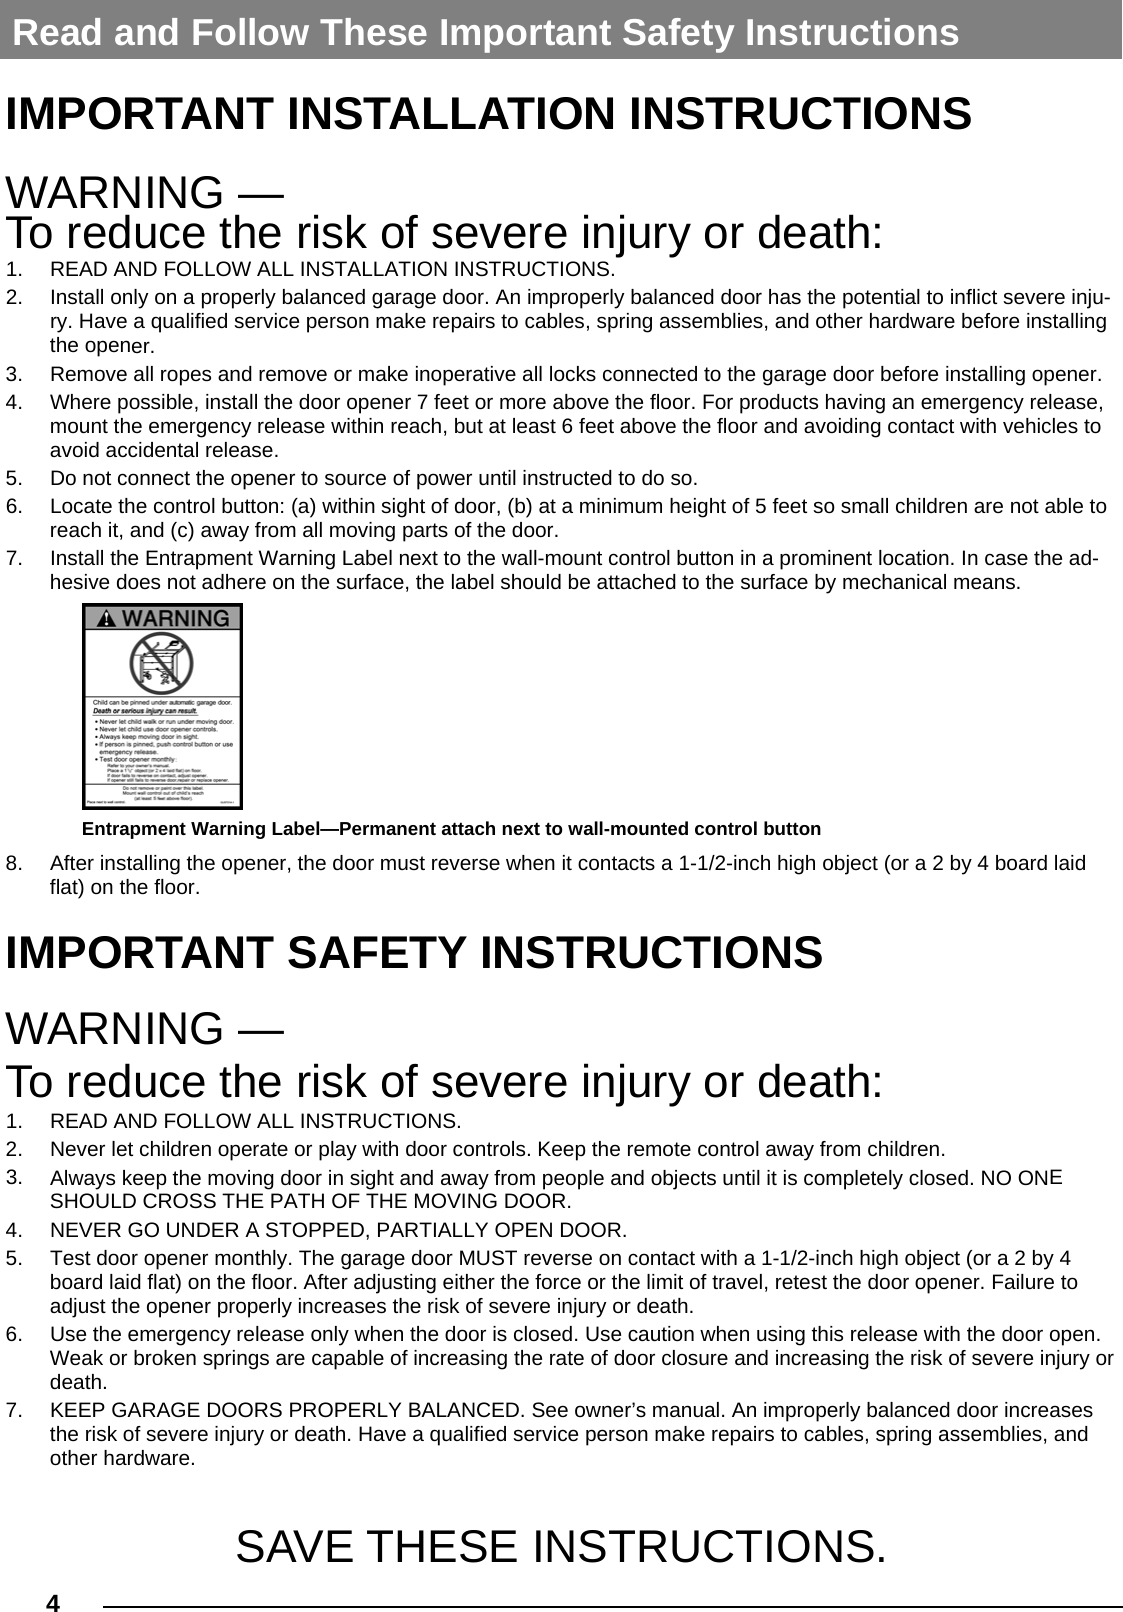 4  IMPORTANT INSTALLATION INSTRUCTIONS WARNING —  To reduce the risk of severe injury or death: 1. READ AND FOLLOW ALL INSTALLATION INSTRUCTIONS.2. Install only on a properly balanced garage door. An improperly balanced door has the potential to inflict severe inju-ry. Have a qualified service person make repairs to cables, spring assemblies, and other hardware before installingthe opener.3. Remove all ropes and remove or make inoperative all locks connected to the garage door before installing opener.4. Where possible, install the door opener 7 feet or more above the floor. For products having an emergency release,mount the emergency release within reach, but at least 6 feet above the floor and avoiding contact with vehicles toavoid accidental release.5. Do not connect the opener to source of power until instructed to do so.6. Locate the control button: (a) within sight of door, (b) at a minimum height of 5 feet so small children are not able toreach it, and (c) away from all moving parts of the door.7. Install the Entrapment Warning Label next to the wall-mount control button in a prominent location. In case the ad-hesive does not adhere on the surface, the label should be attached to the surface by mechanical means.8. After installing the opener, the door must reverse when it contacts a 1-1/2-inch high object (or a 2 by 4 board laidflat) on the floor.IMPORTANT SAFETY INSTRUCTIONS WARNING — To reduce the risk of severe injury or death: 1. READ AND FOLLOW ALL INSTRUCTIONS.2. Never let children operate or play with door controls. Keep the remote control away from children.3. Always keep the moving door in sight and away from people and objects until it is completely closed. NO ONESHOULD CROSS THE PATH OF THE MOVING DOOR.4. NEVER GO UNDER A STOPPED, PARTIALLY OPEN DOOR.5. Test door opener monthly. The garage door MUST reverse on contact with a 1-1/2-inch high object (or a 2 by 4board laid flat) on the floor. After adjusting either the force or the limit of travel, retest the door opener. Failure toadjust the opener properly increases the risk of severe injury or death.6. Use the emergency release only when the door is closed. Use caution when using this release with the door open.Weak or broken springs are capable of increasing the rate of door closure and increasing the risk of severe injury ordeath.7. KEEP GARAGE DOORS PROPERLY BALANCED. See owner’s manual. An improperly balanced door increasesthe risk of severe injury or death. Have a qualified service person make repairs to cables, spring assemblies, andother hardware.SAVE THESE INSTRUCTIONS. Read and Follow These Important Safety Instructions Entrapment Warning Label—Permanent attach next to wall-mounted control button